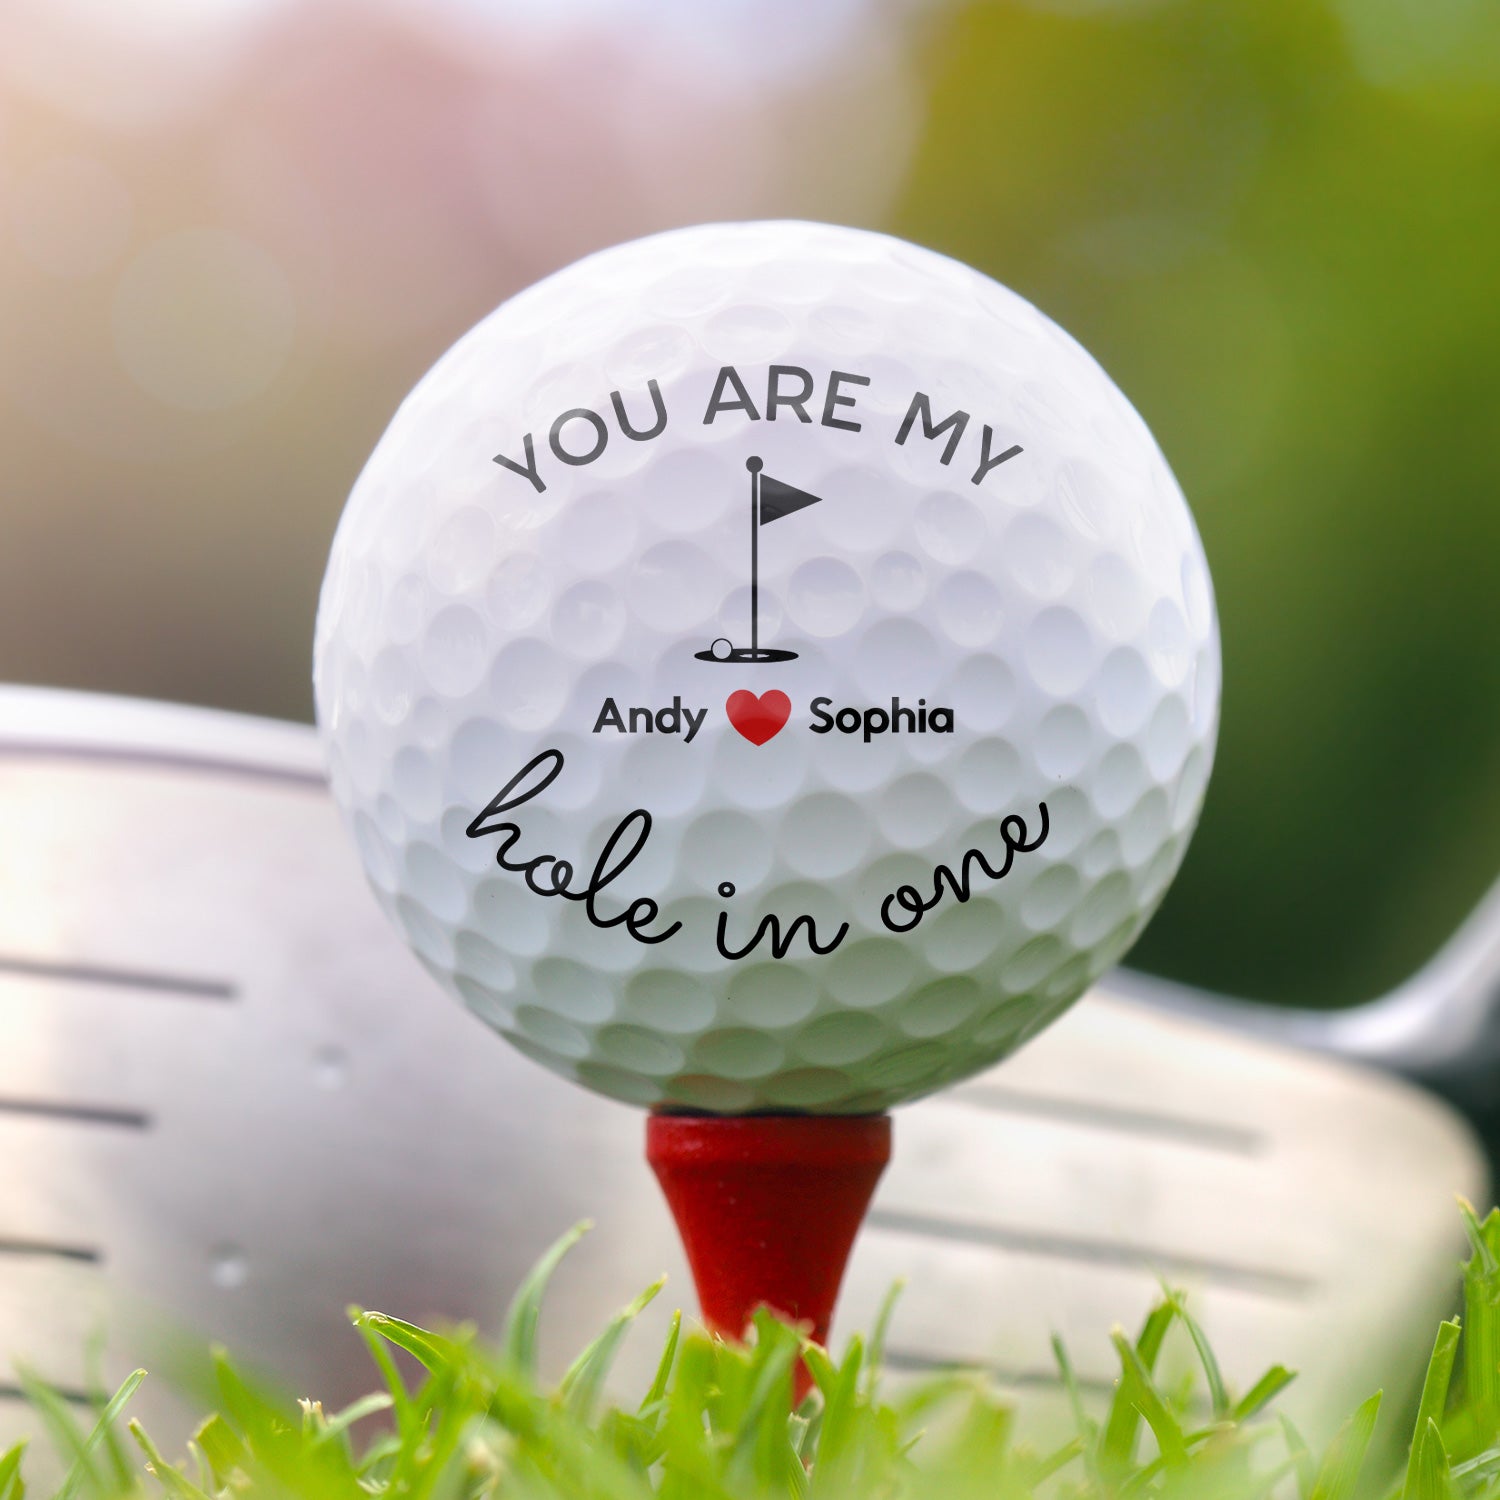 You Are My Hole In One - Gift For Golf Lover, Golfer, Husband, Boyfriend, Dad, Couples - Personalized Golf Ball